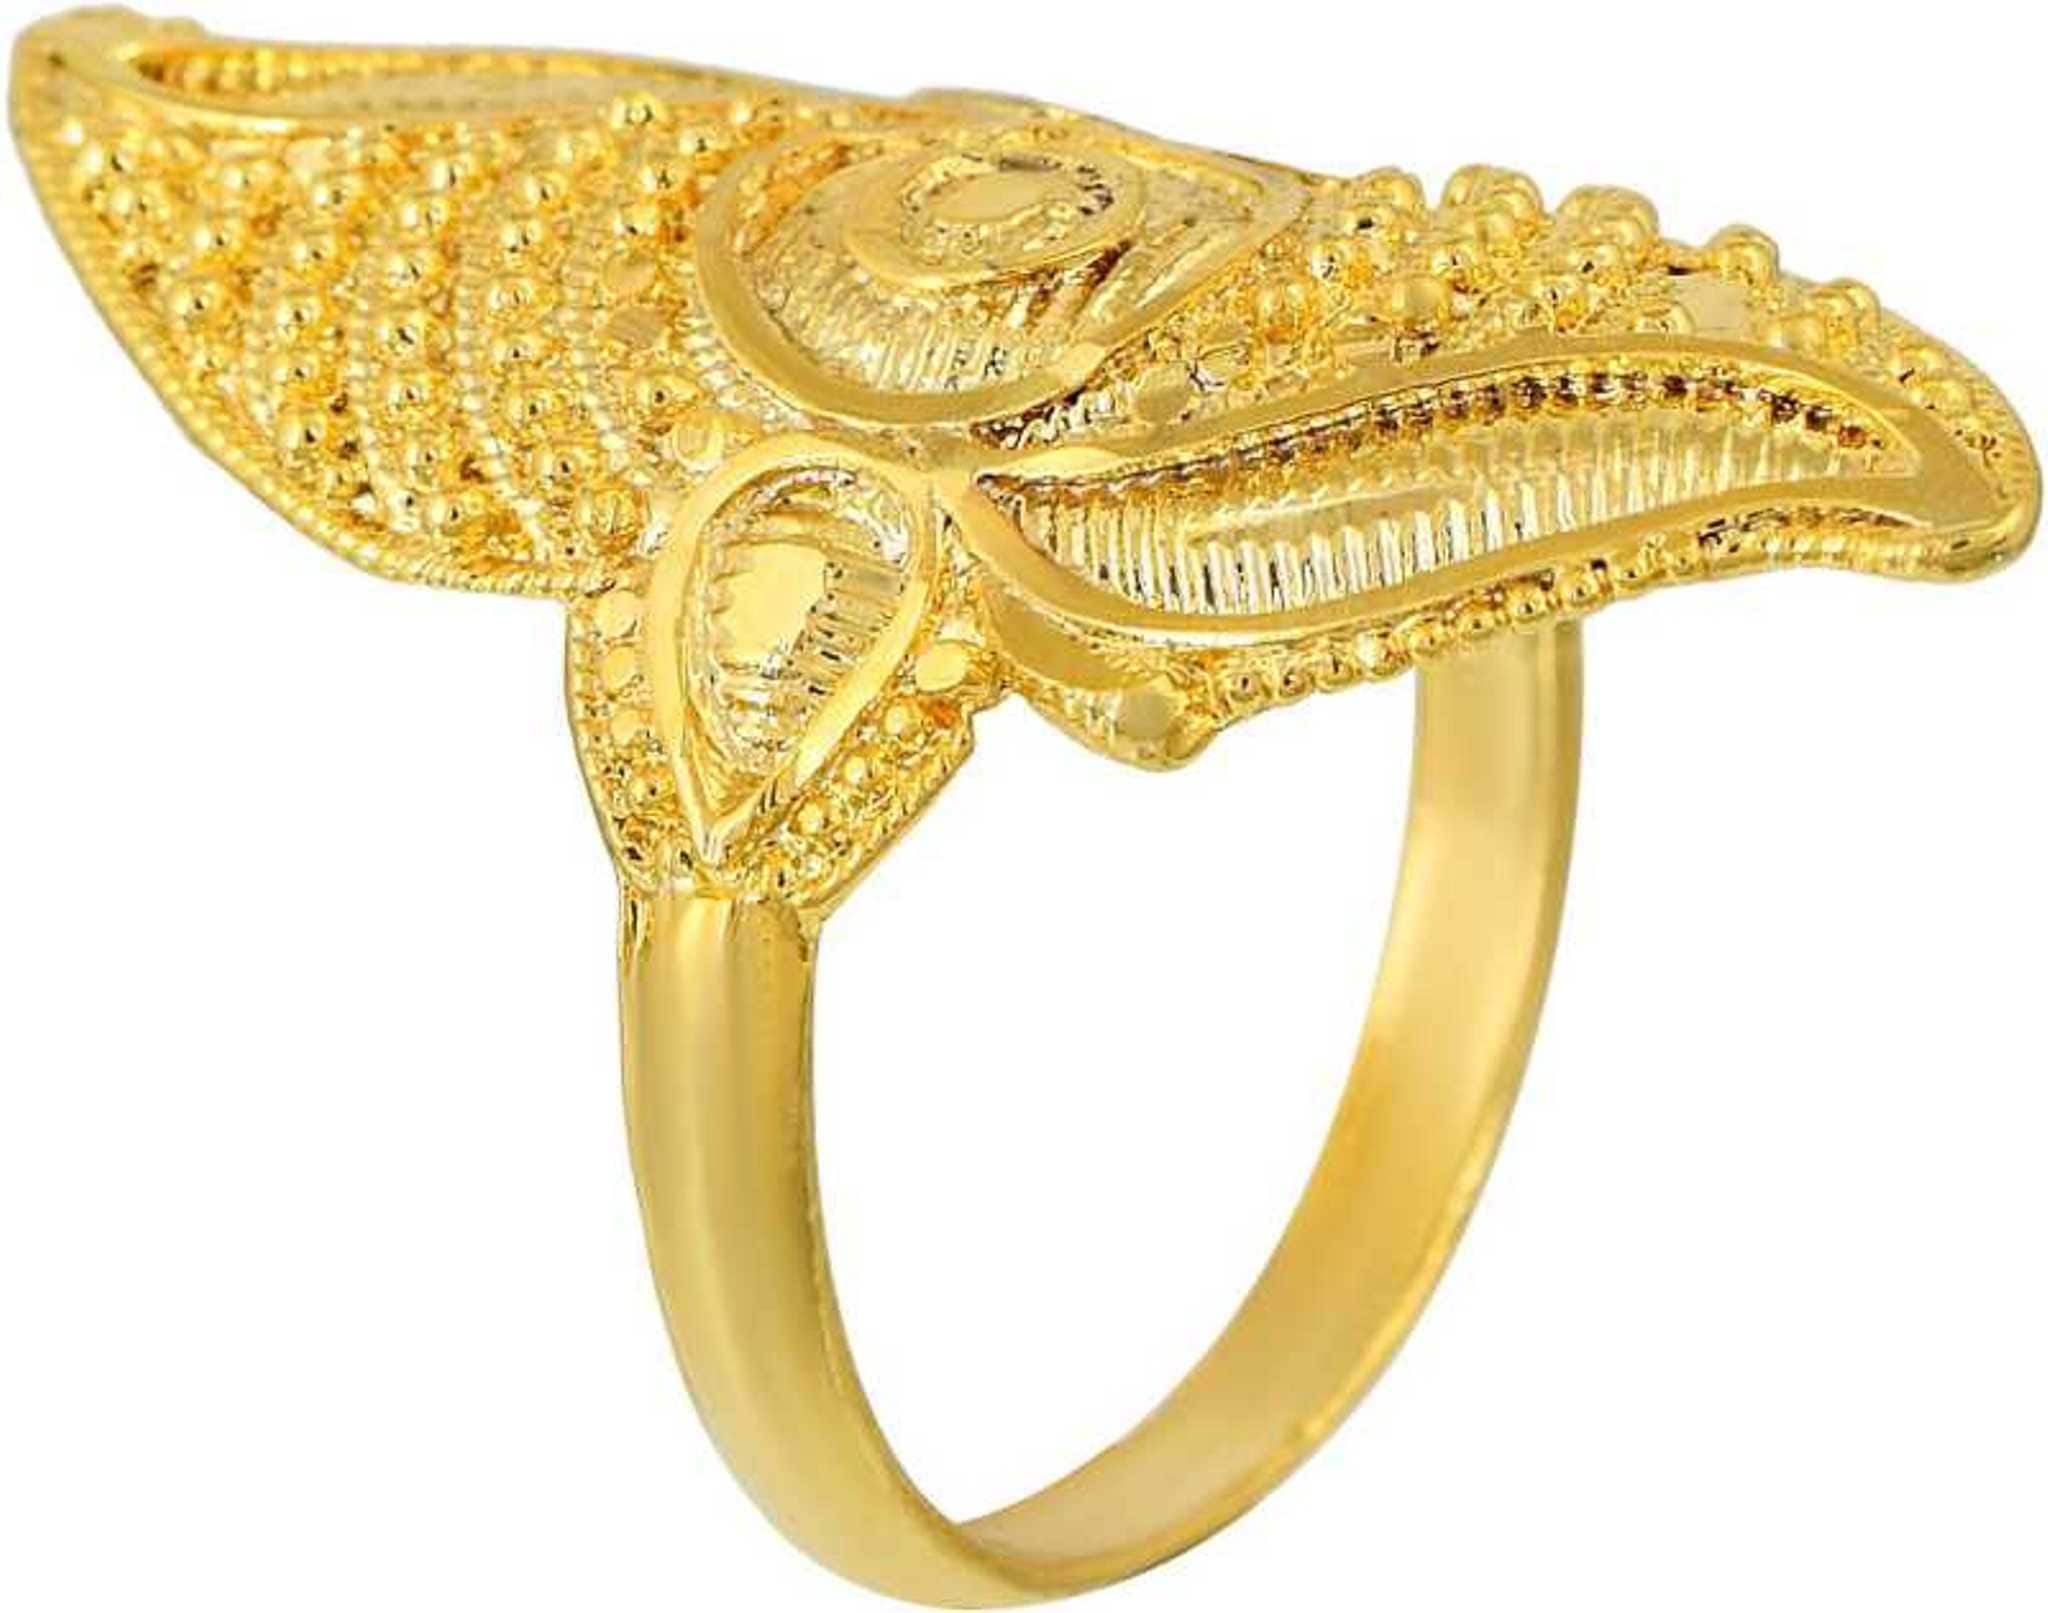 21k Gold Ring – Cleopatra Jewelers